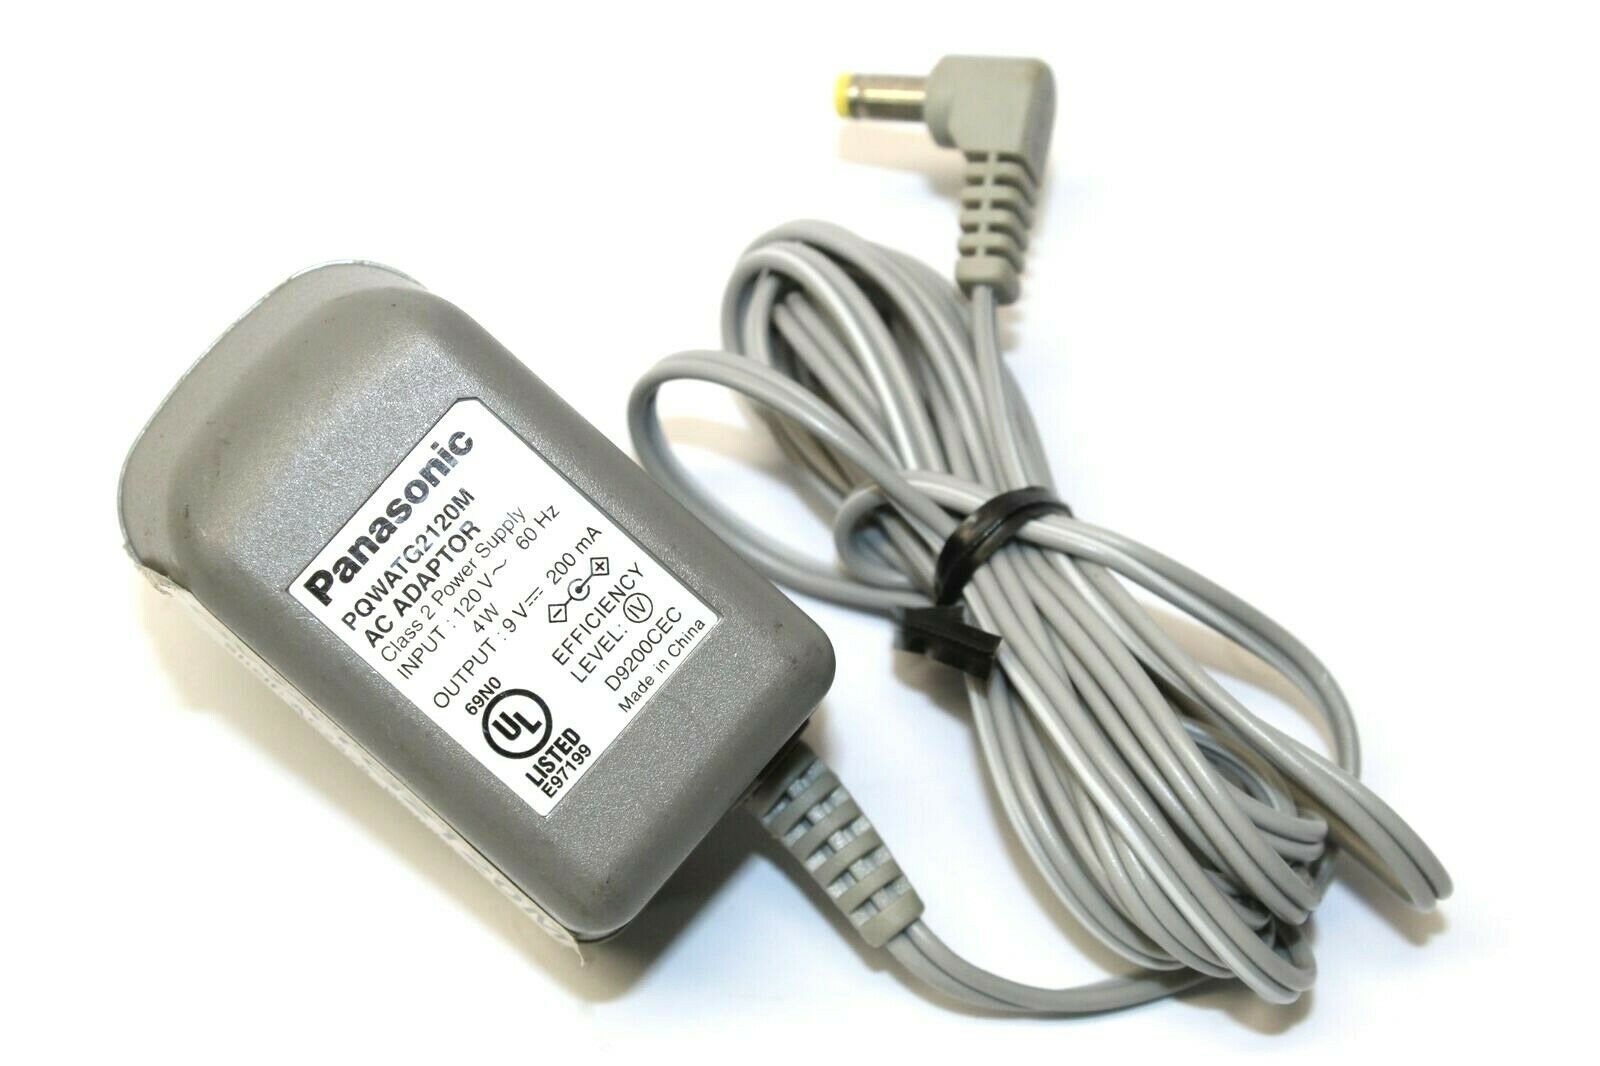 Panasonic PQWATG2120M AC Adapter Power Supply Cord Cable Charger Genuine Original